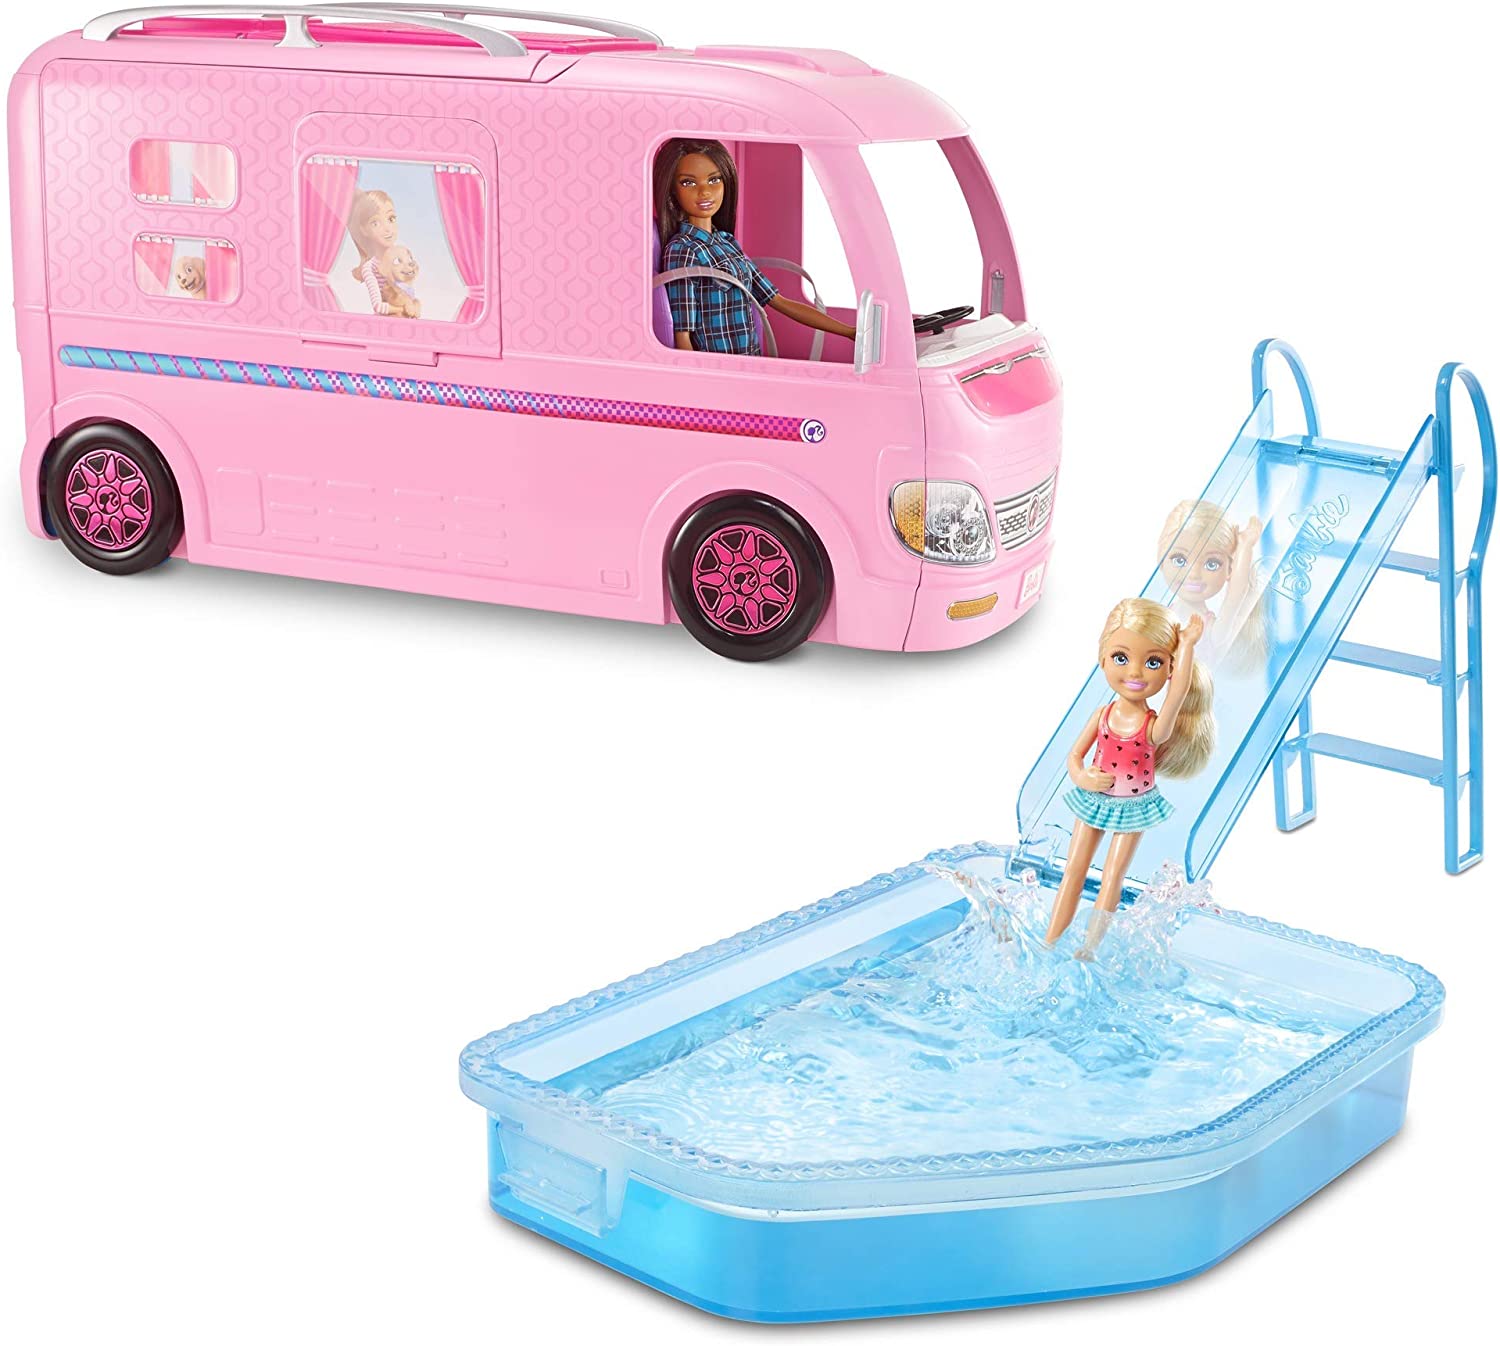 Barbie Dream Camper RV Fully Furnished Camping Playset Kids Play Toy Gift  60 pcs